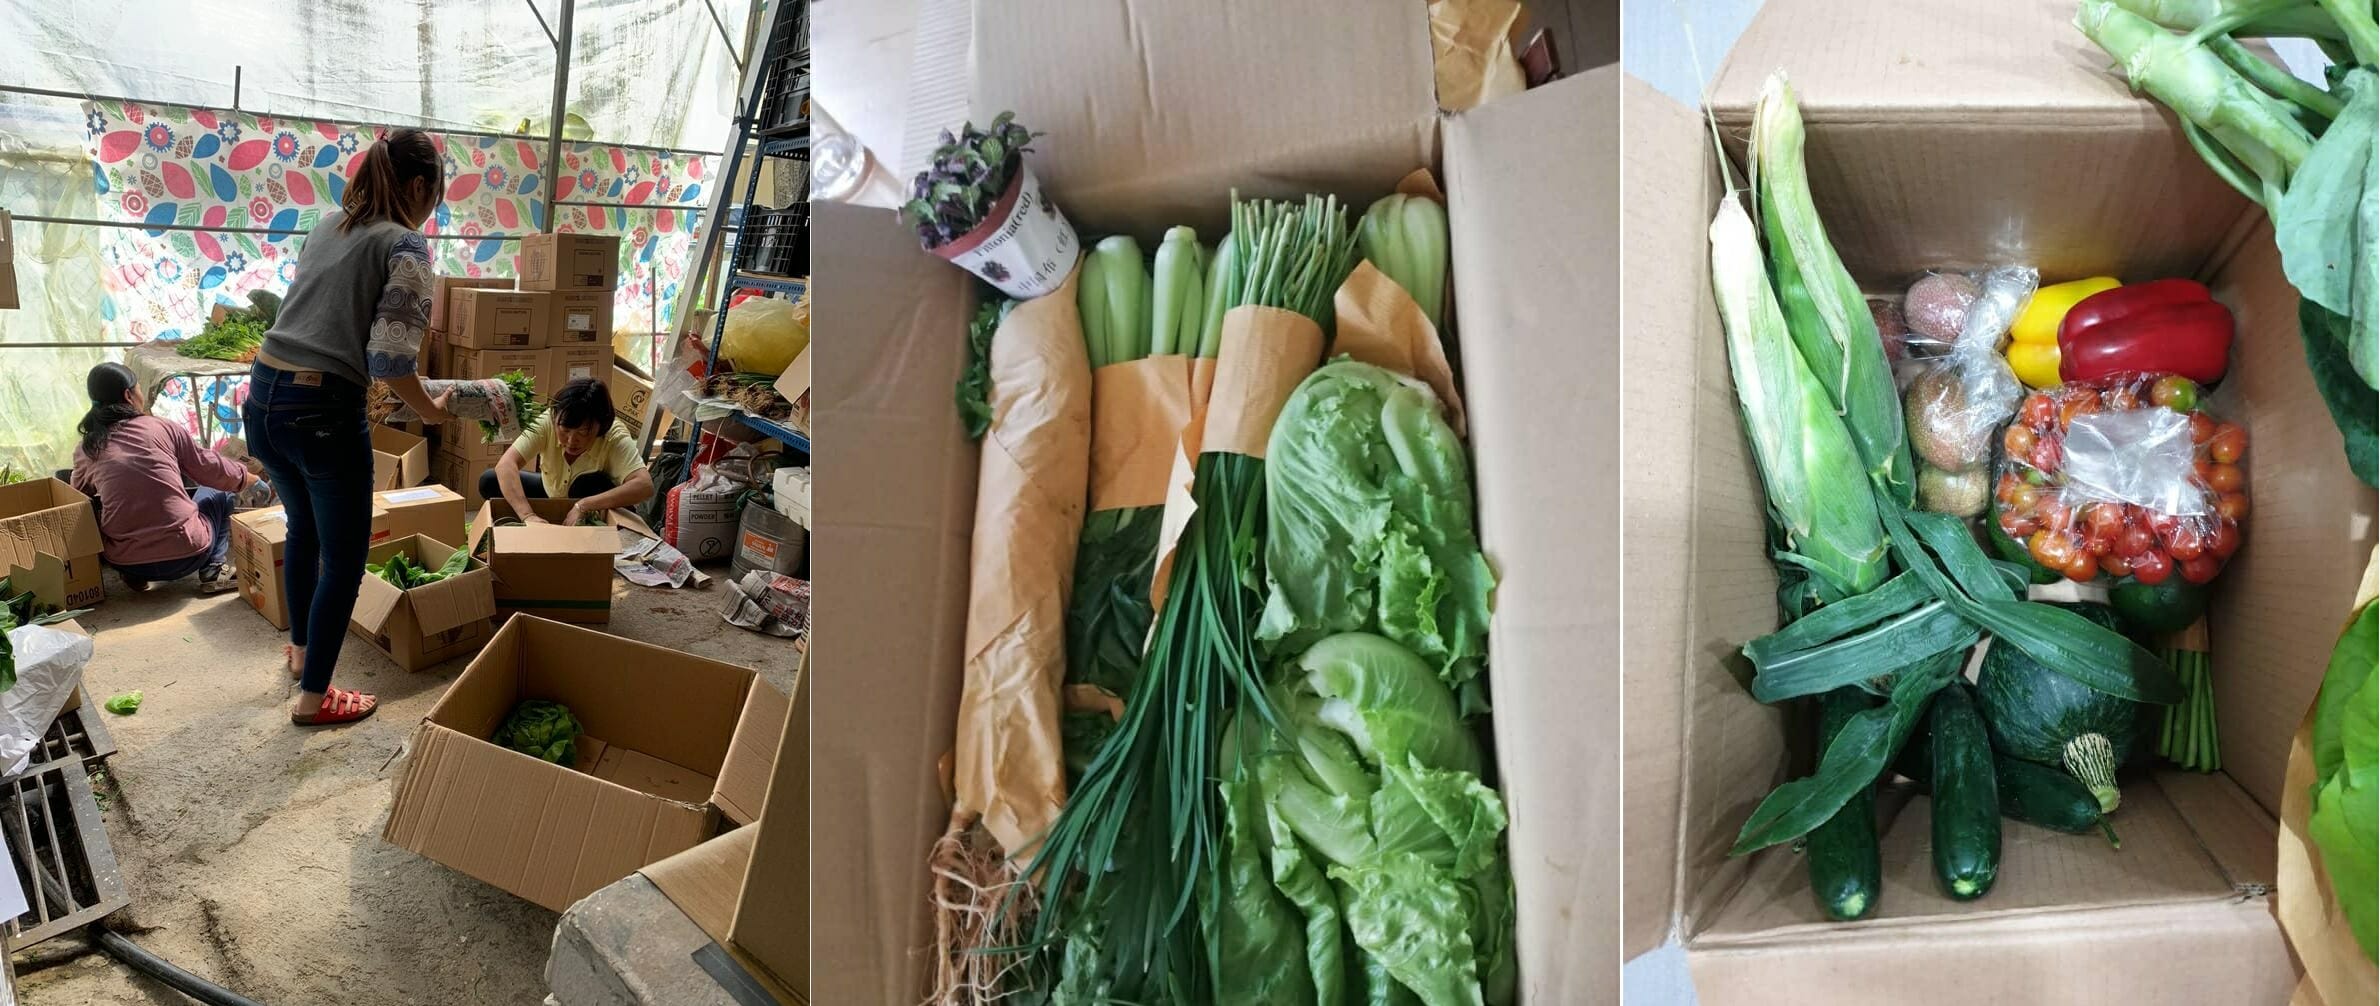 [Serene’s parents and brother pack the bundles of veggies into cardboard boxes to be delivered to families in KL]